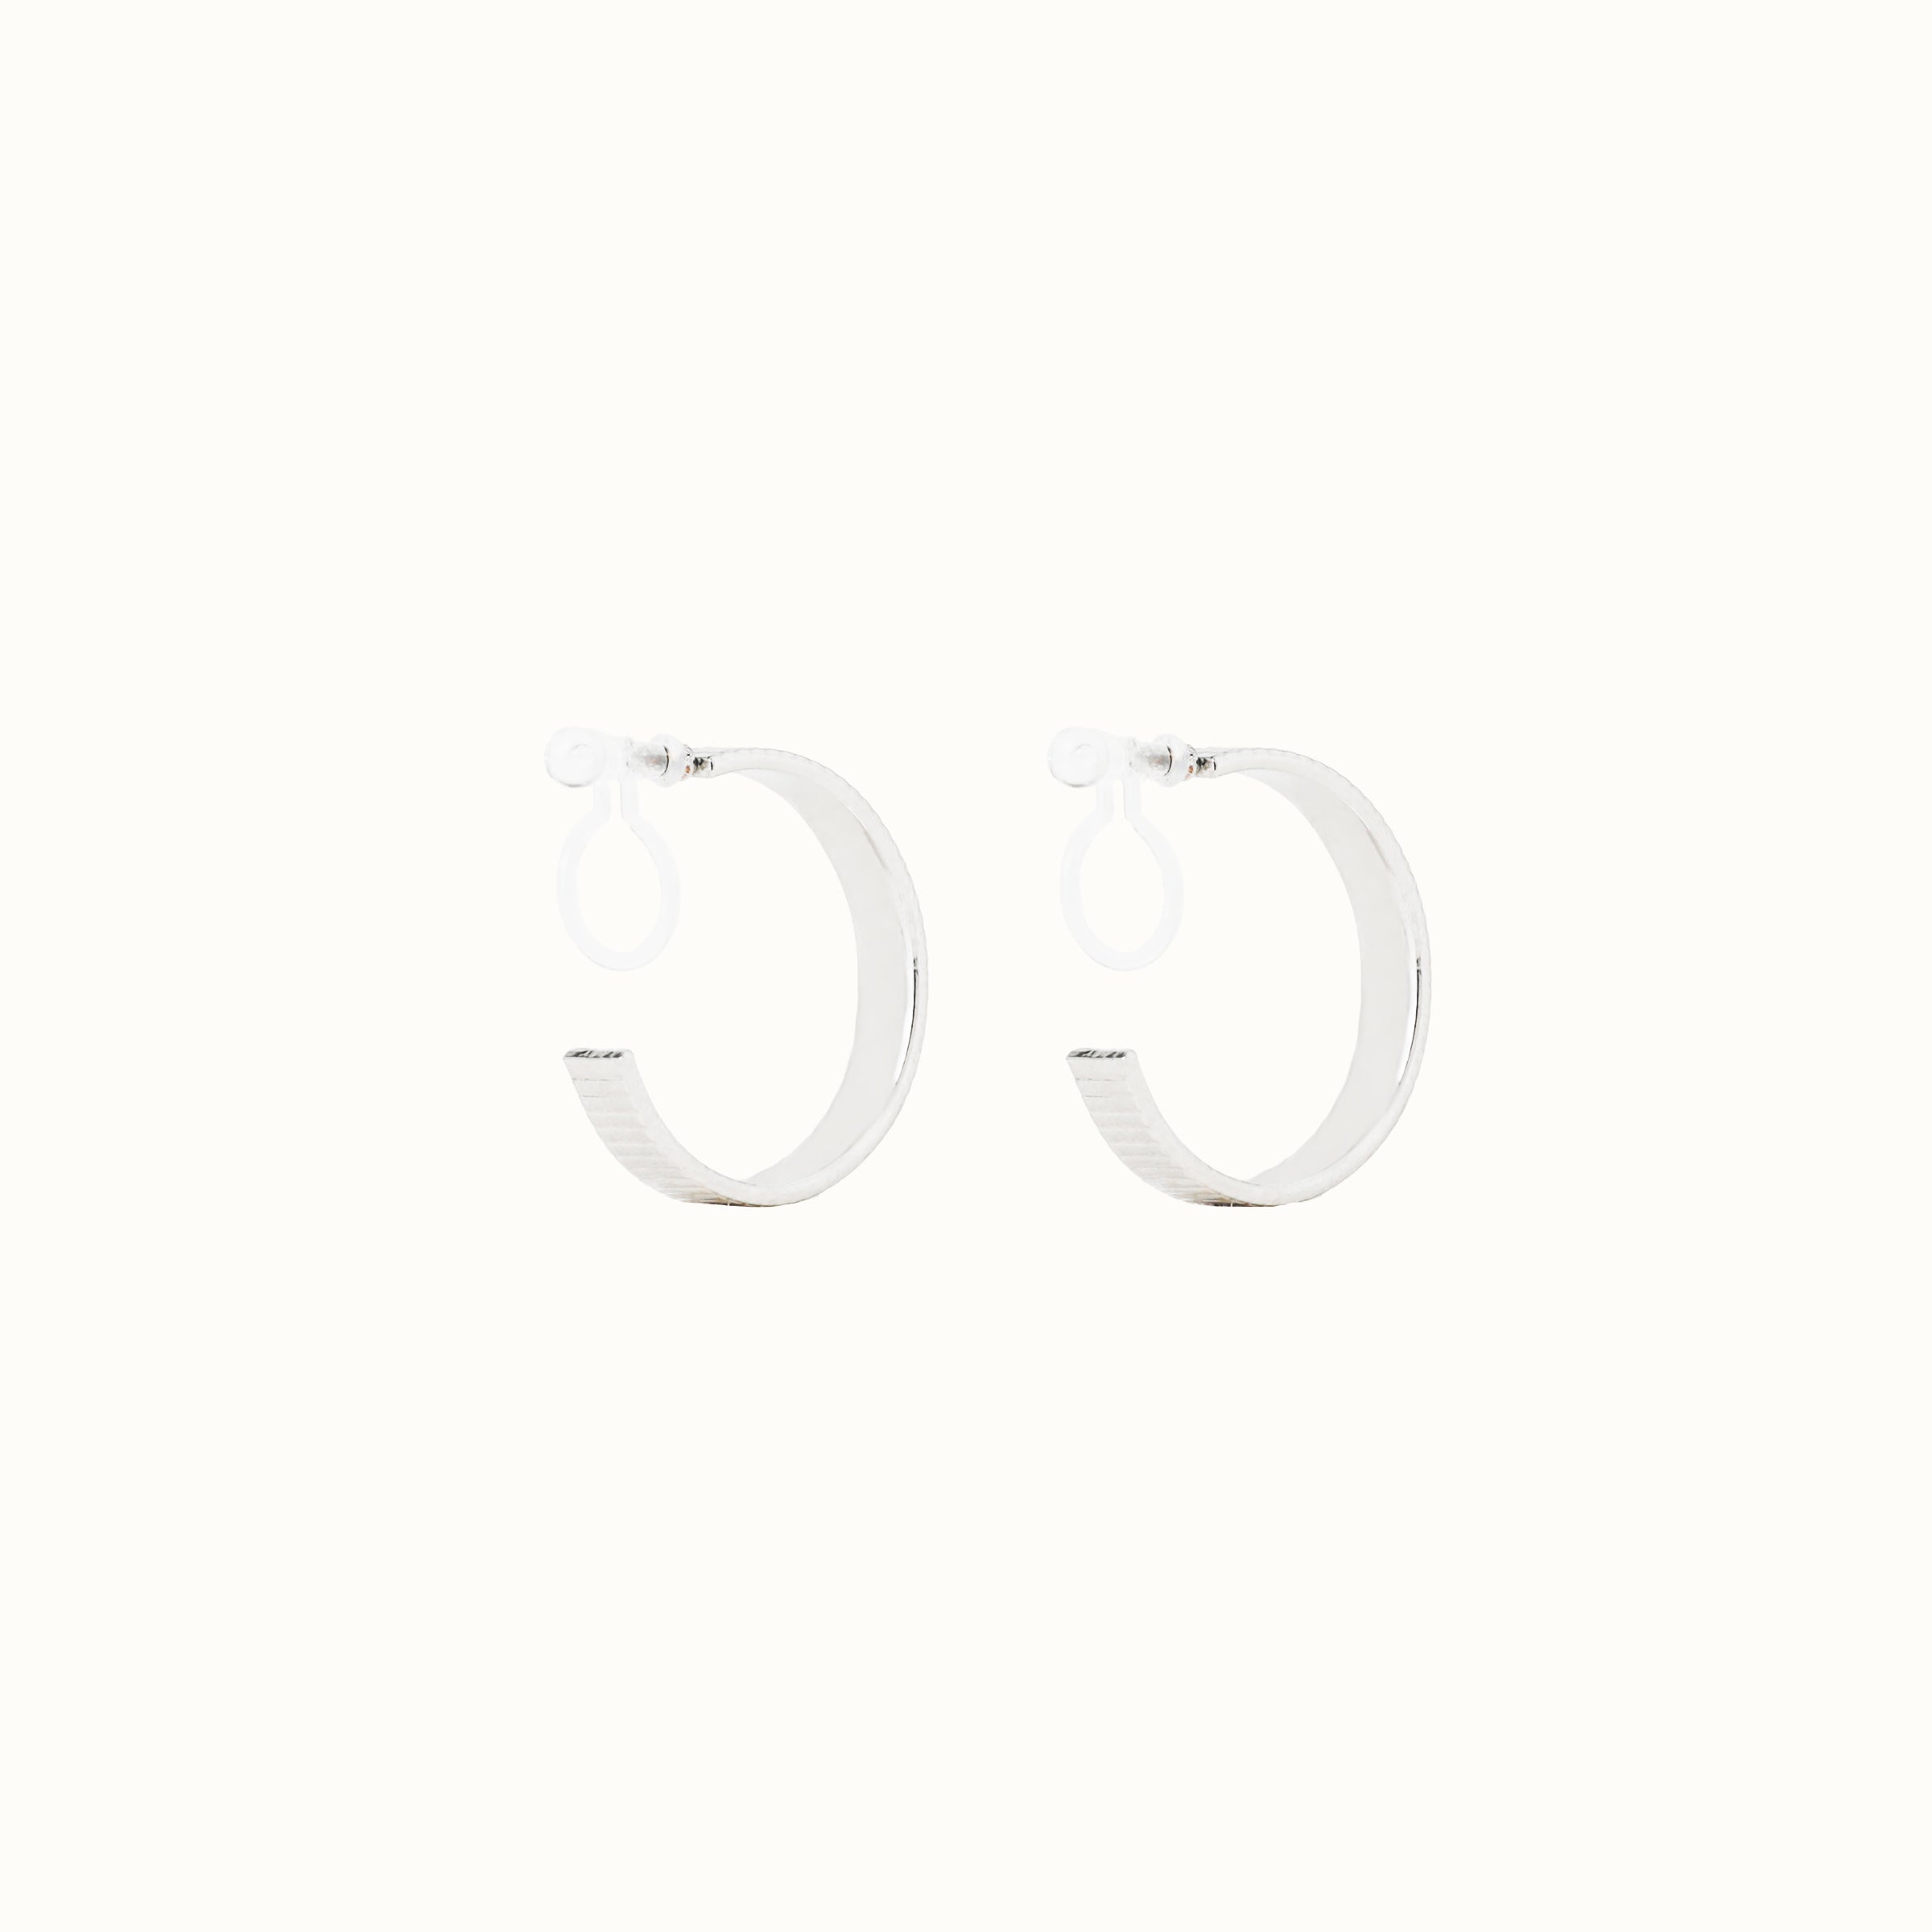 Image of the Pleated Hoop Clip On Earrings in Silver offer a resin clip-on closure for a secure and comfortable fit for a variety of ear sizes and sensitivities. With an average wear duration of 8-12 hours, these earrings are perfect for all-day wear. Please note that this listing is for a single pair.